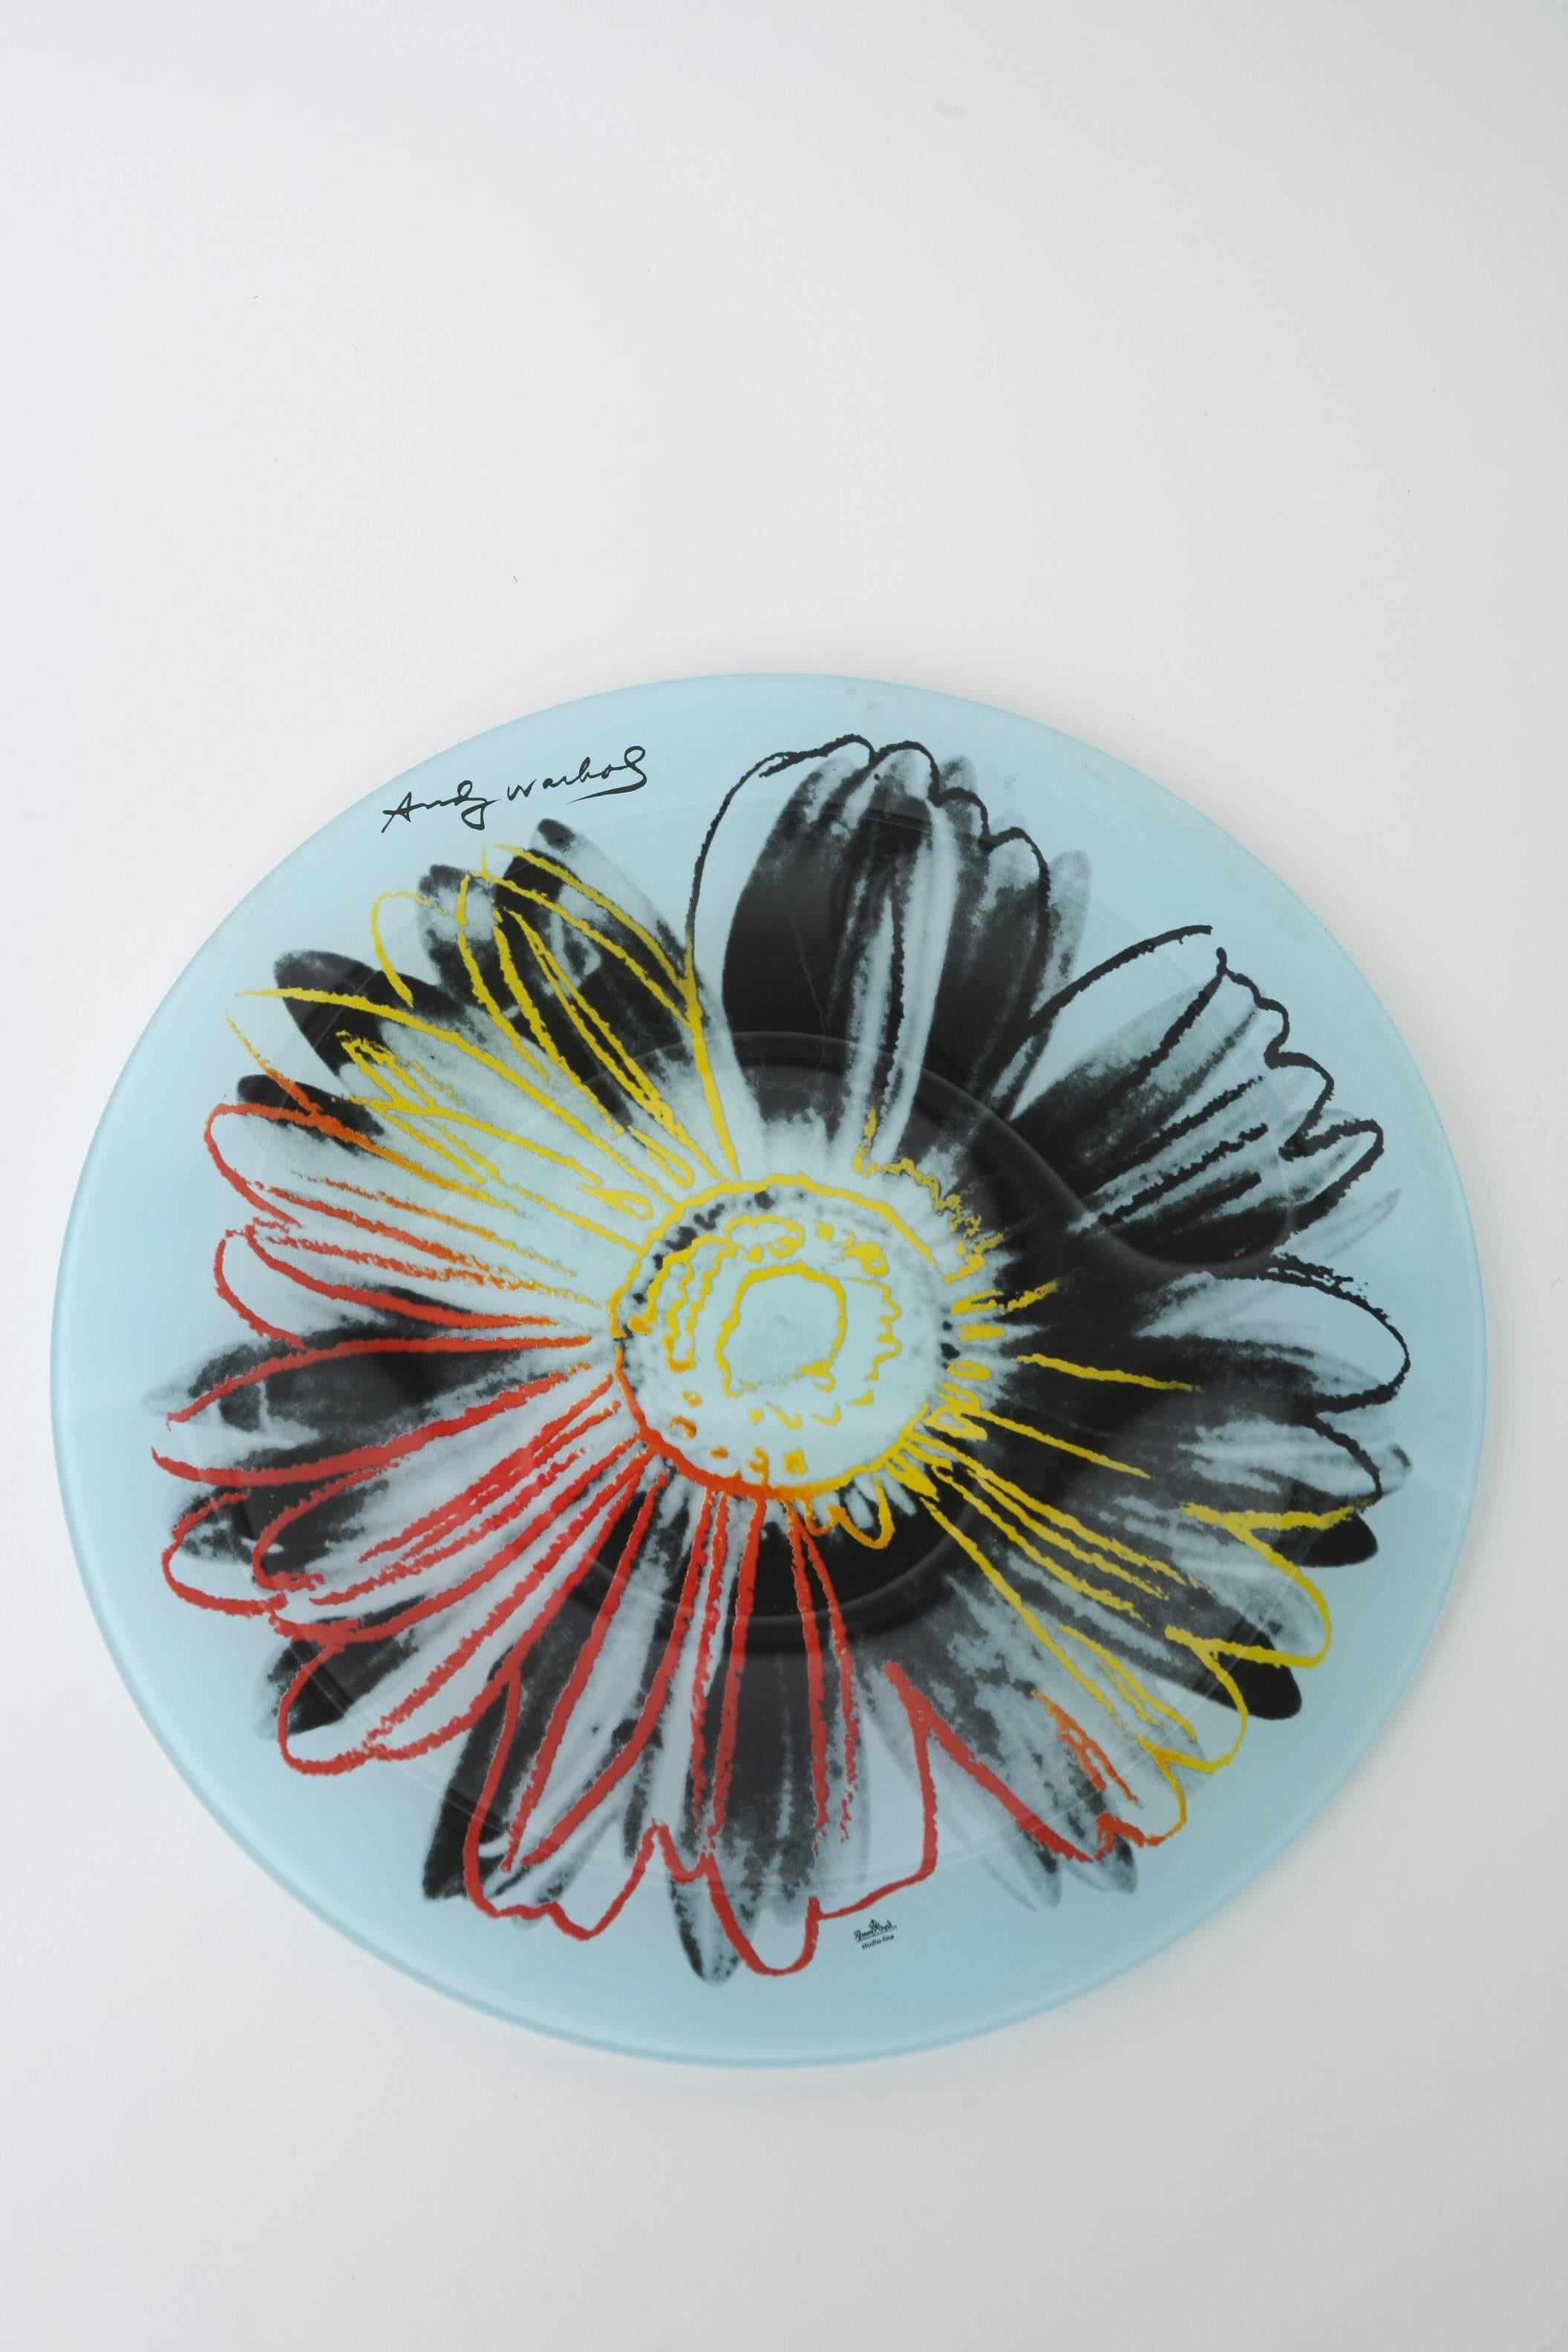 This beautiful abstract flower glass plate after an original work by Andy Warhol for Rosenthal Studio Line is great for serving or just as is on a cocktail table.

Please note we have another Warhol glass plate on line in a different color palette